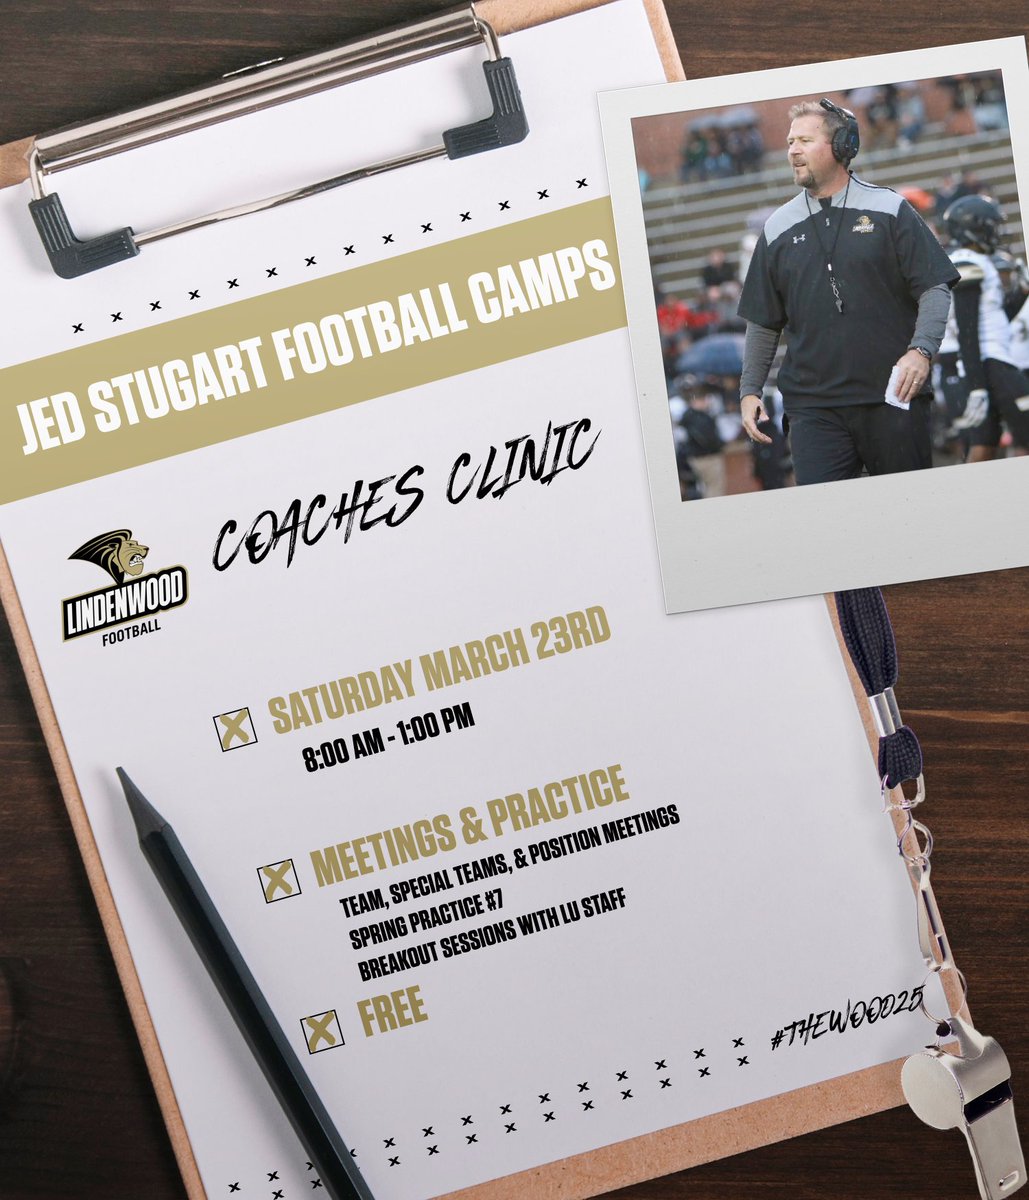 Join us on March 23rd for a FREE Coaches Clinic. Register here: register.ryzer.com/camp.cfm?id=27… #LUFBCC24